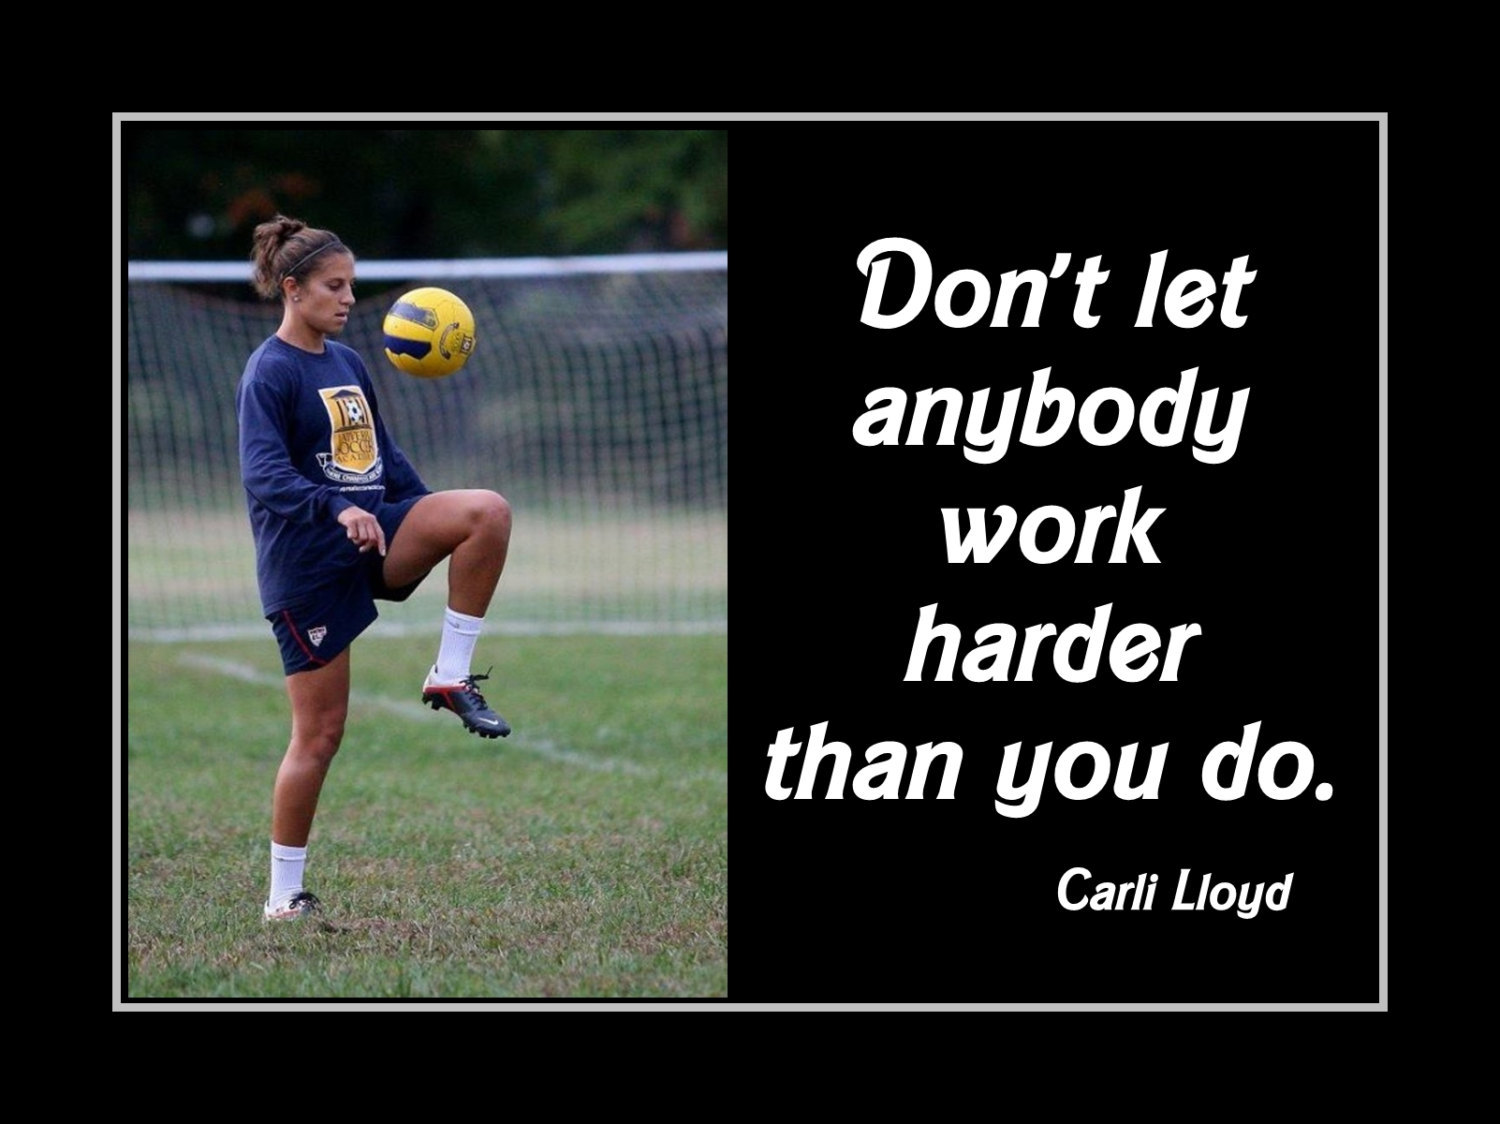 Rare Carli Lloyd Inspirational USWNT Soccer Quote Poster Unique Motivation Gift - $19.99 - $39.99